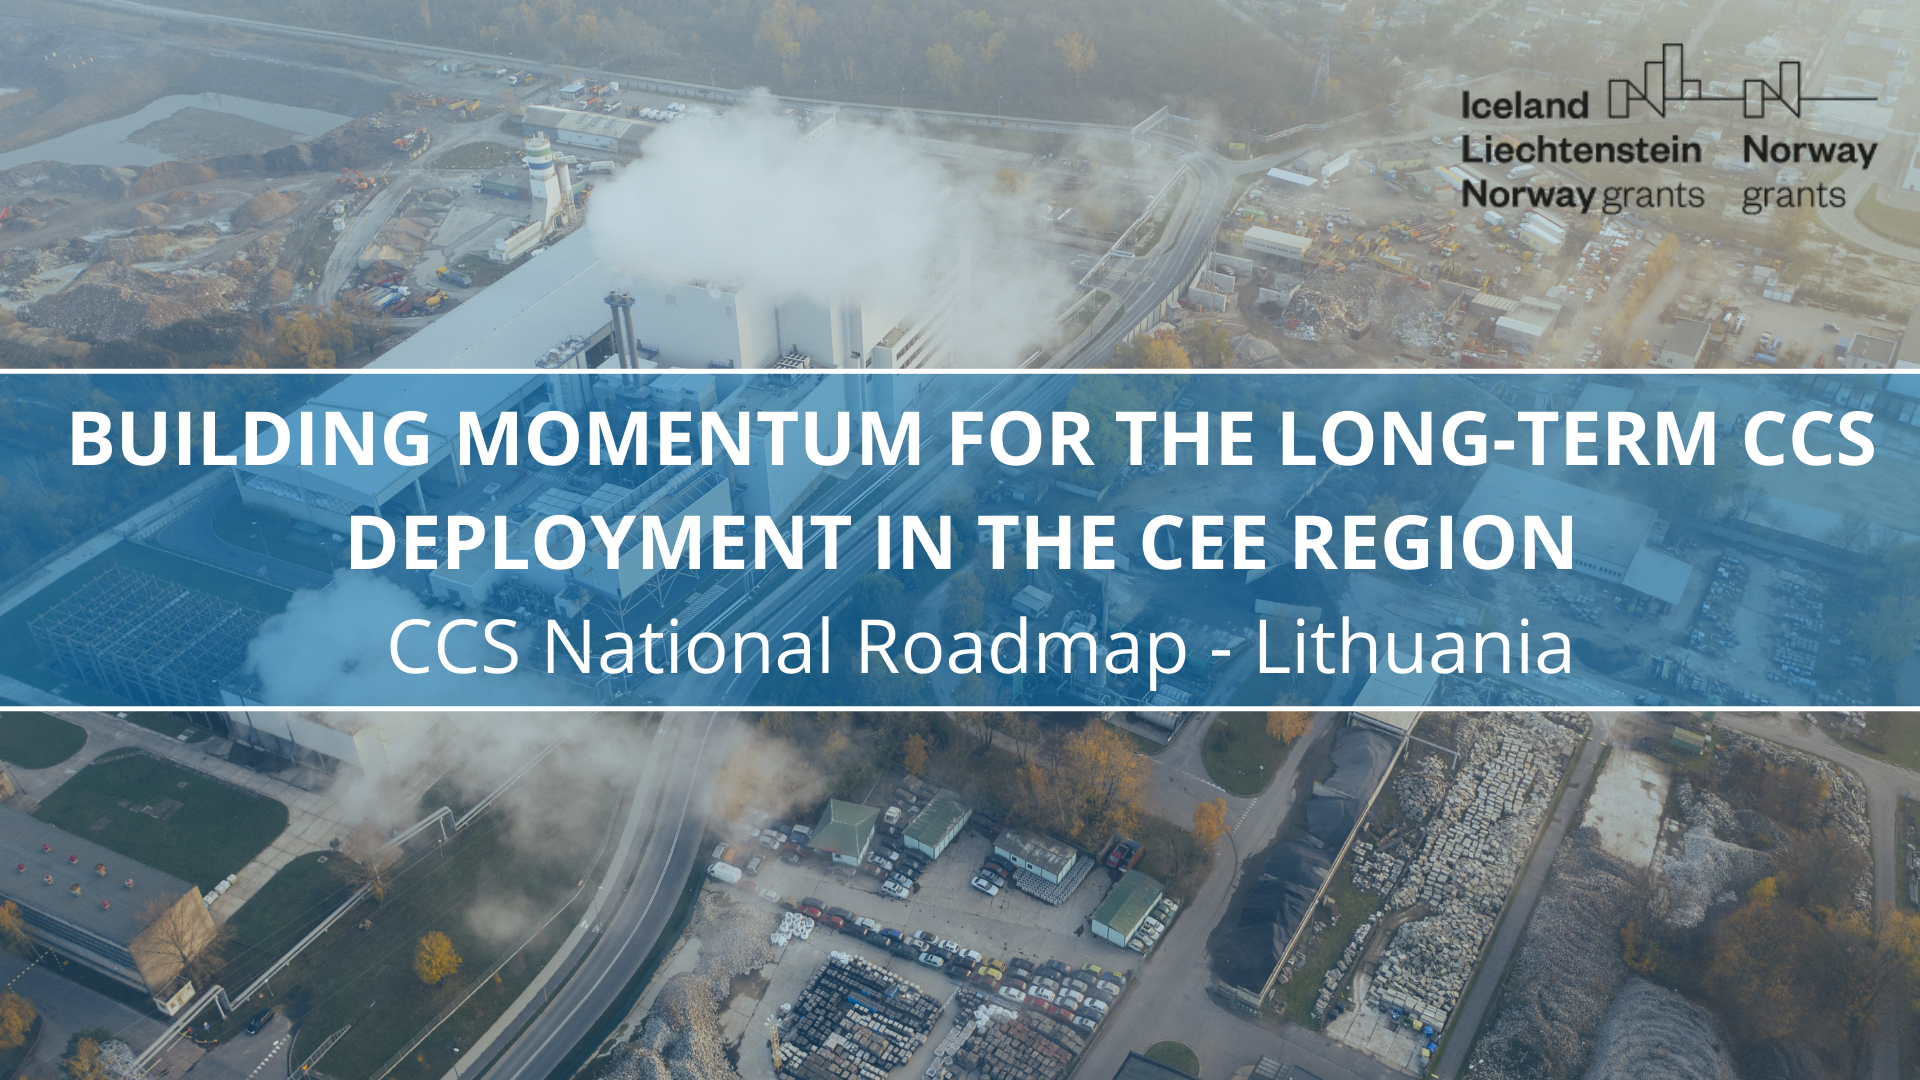 BUILDING MOMENTUM FOR THE LONG-TERM CCS DEPLOYMENT IN THE CEE REGION – CCS National Roadmap – Lithuania